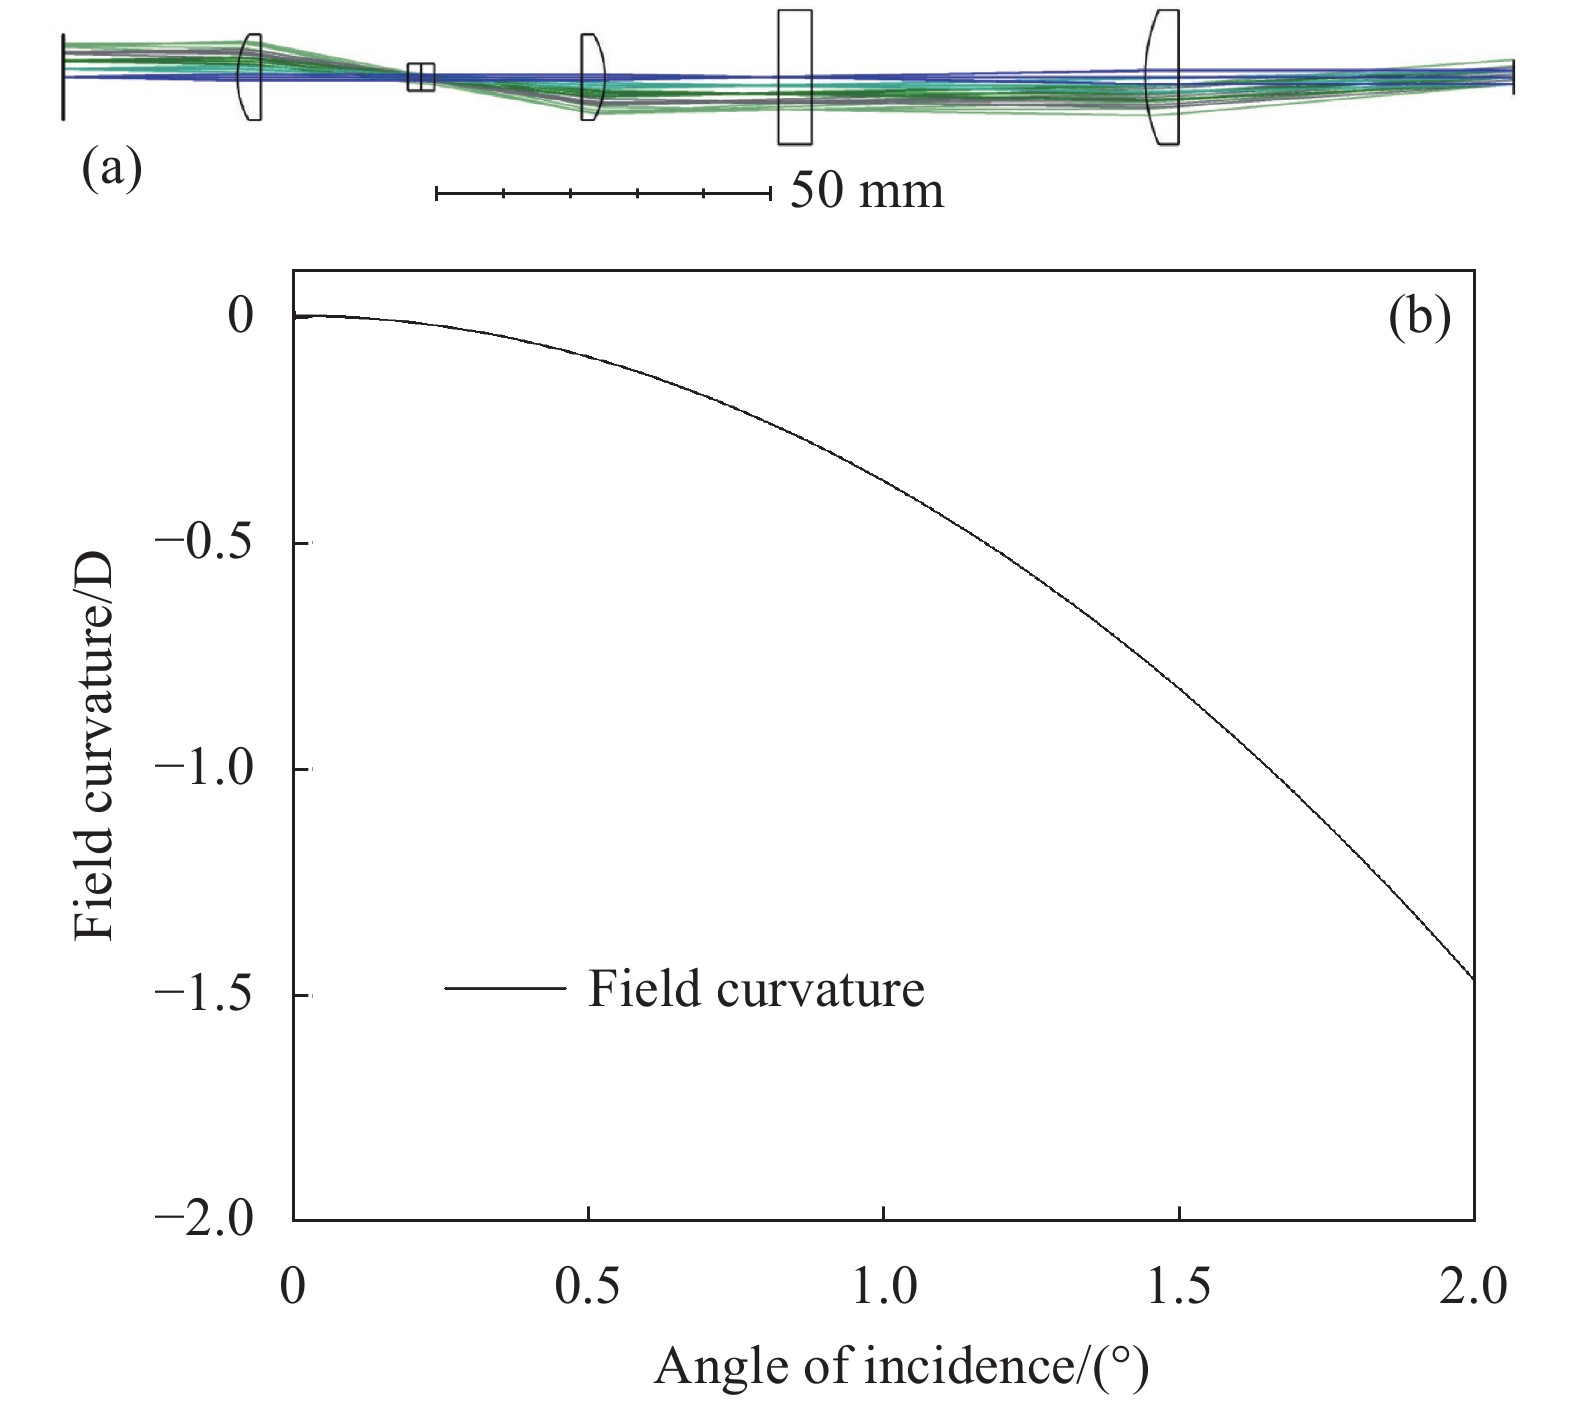 (a) Zemax cross section and (b) calculated field curvature of the laser transmitter with spherical lenses